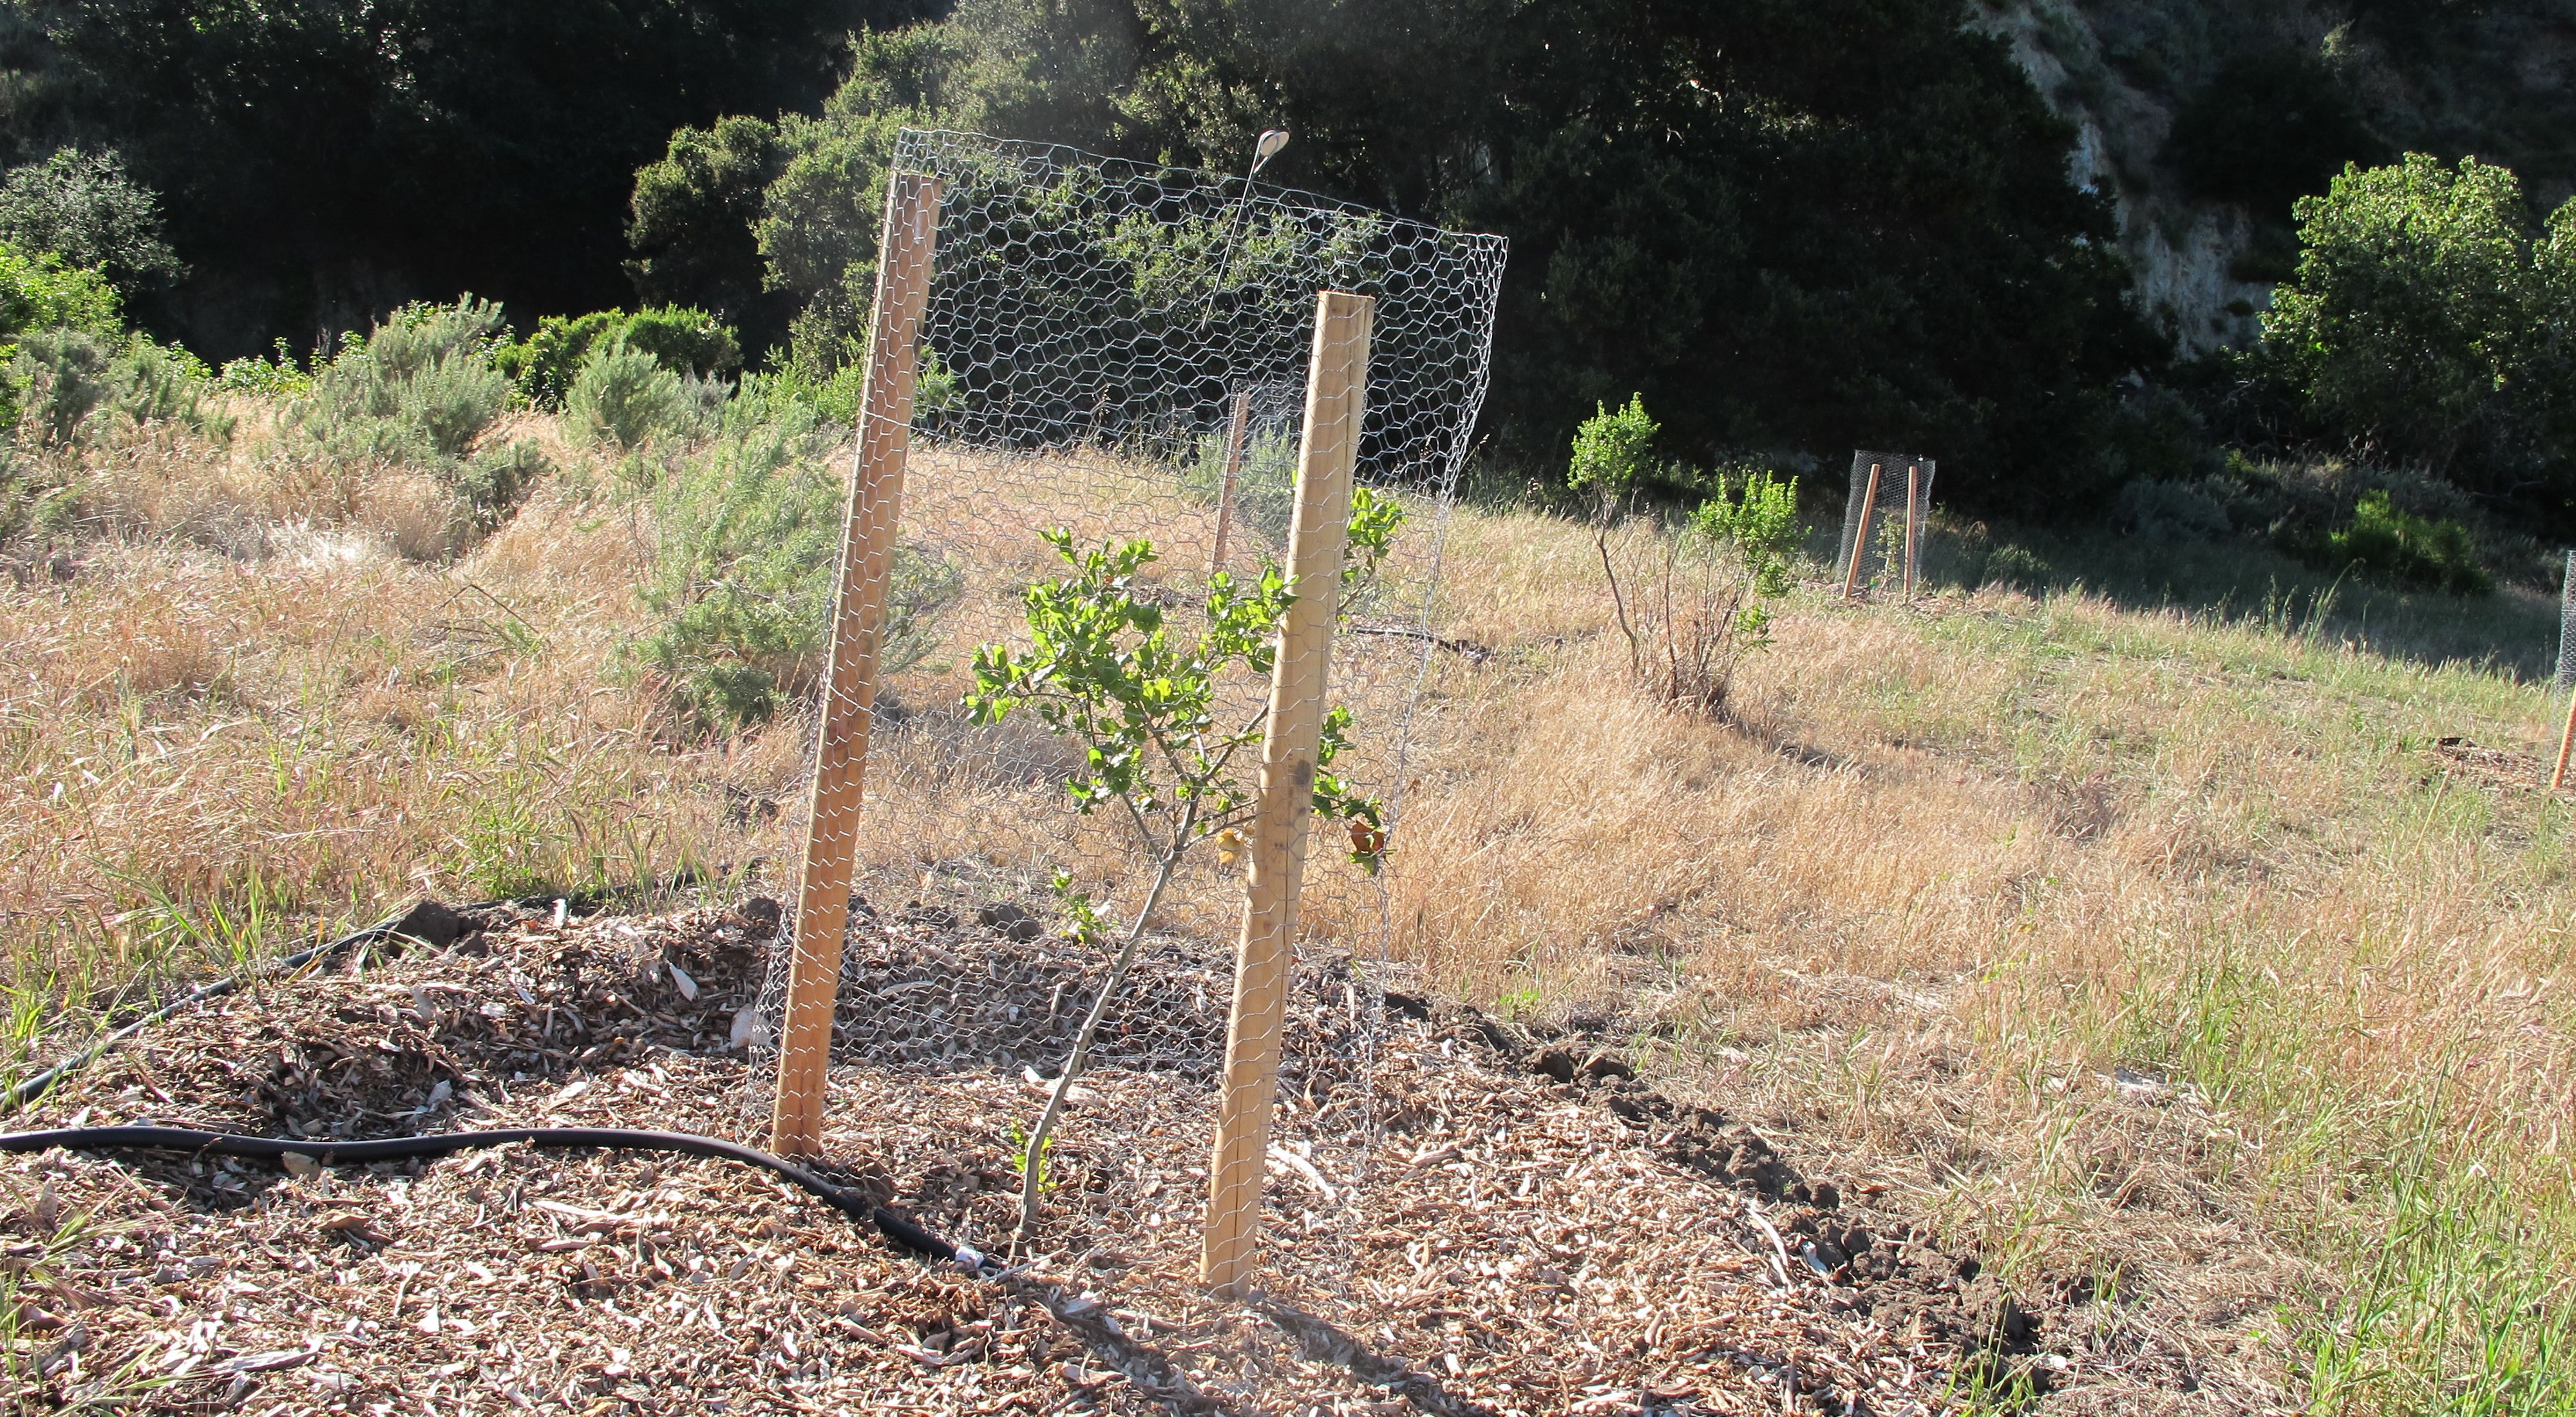 A small tree planted inside a protective wire enclosure in a grassy field.